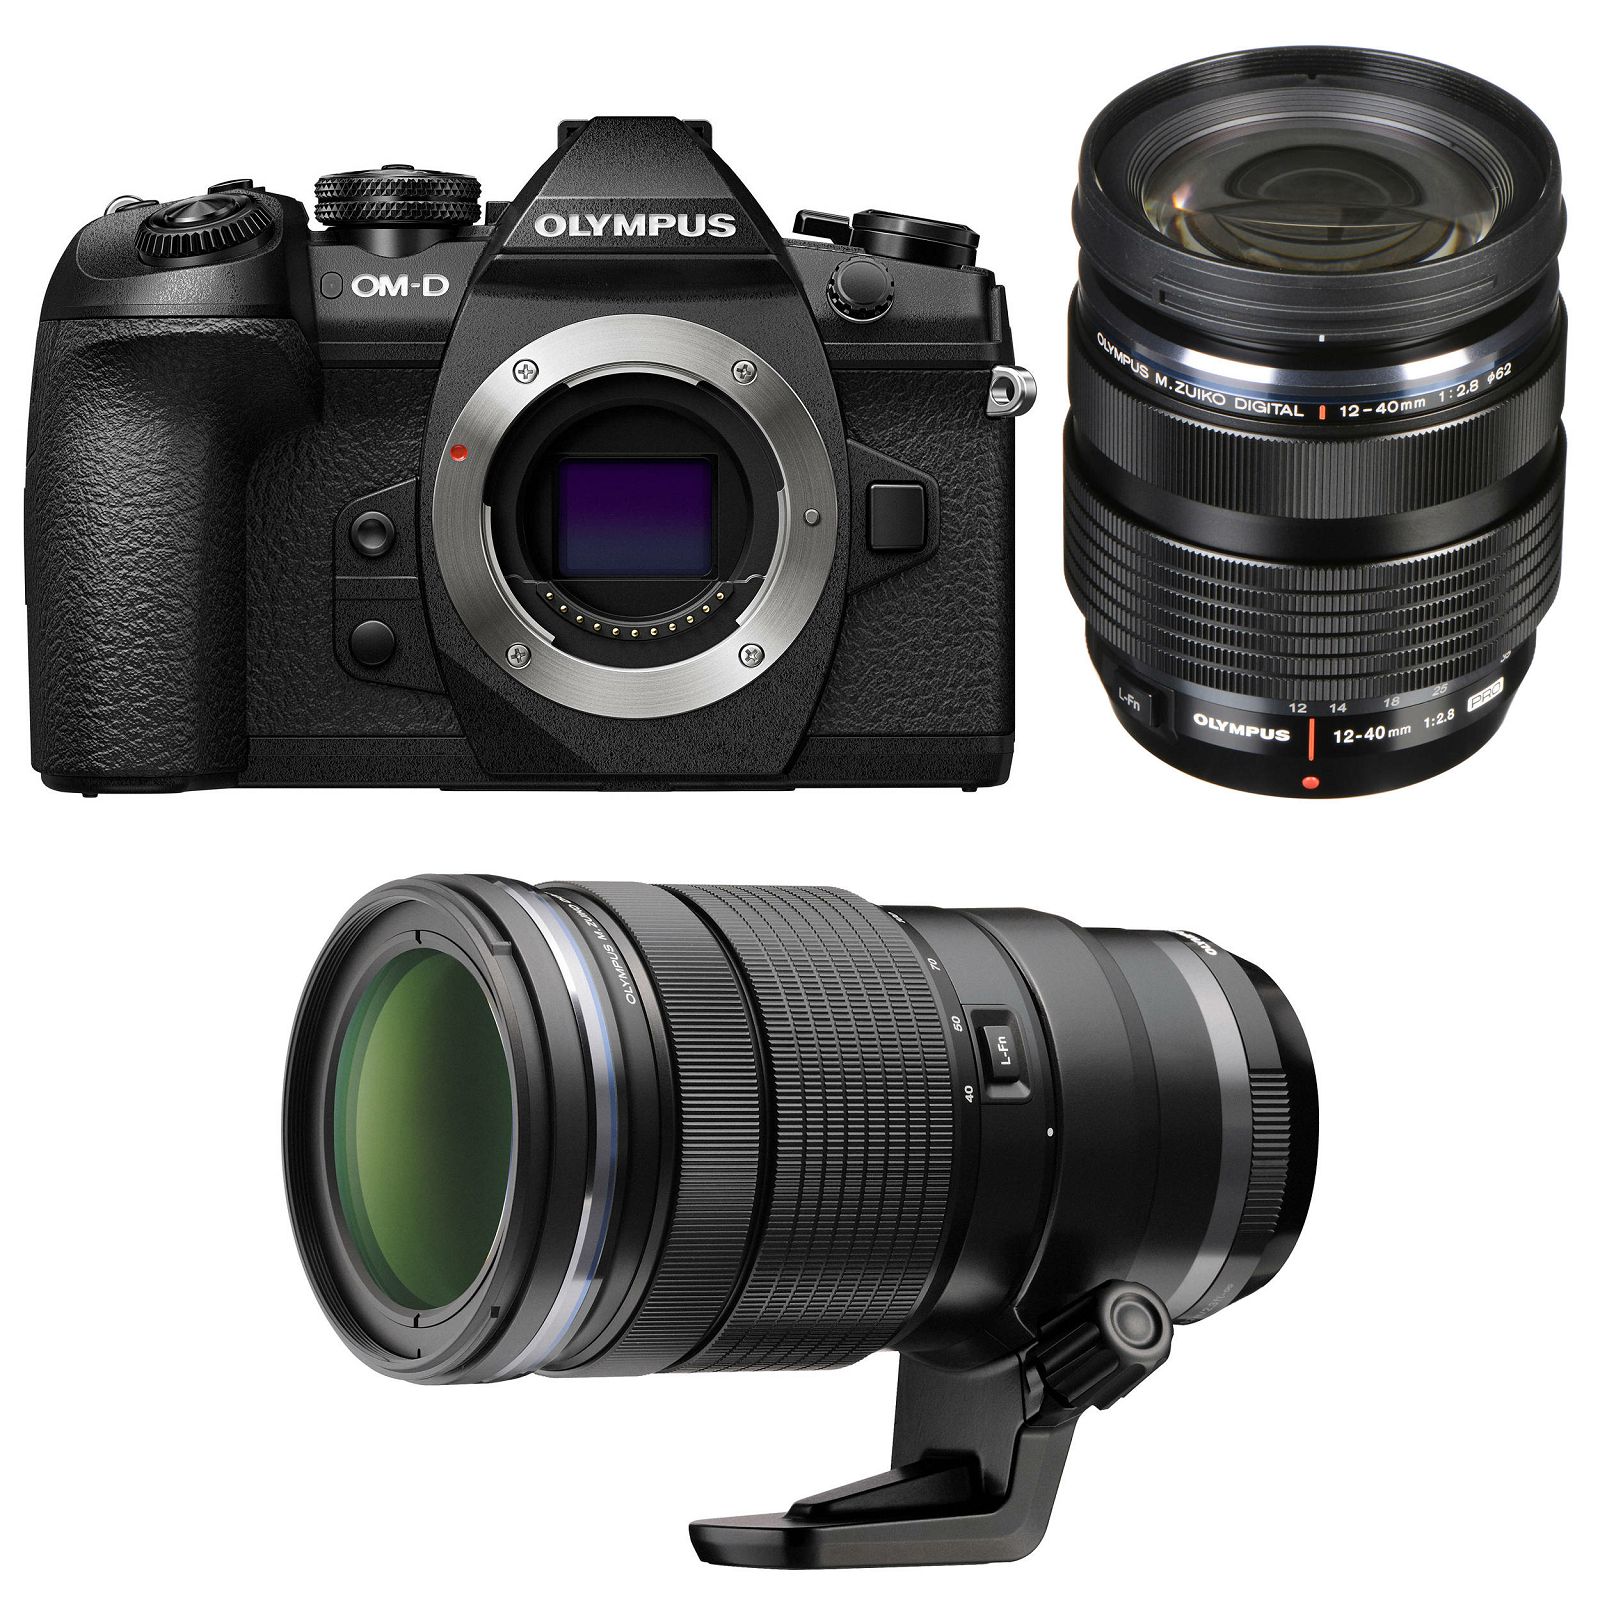 Olympus E-M1 II + ED 12-40mm + 40-150mm Double Zoom KIT PRO Black digitalni fotoaparat Mirrorless MFT Micro Four Thirds Digital Camera including Charger Battery and Lens Hood (V207061BE010)